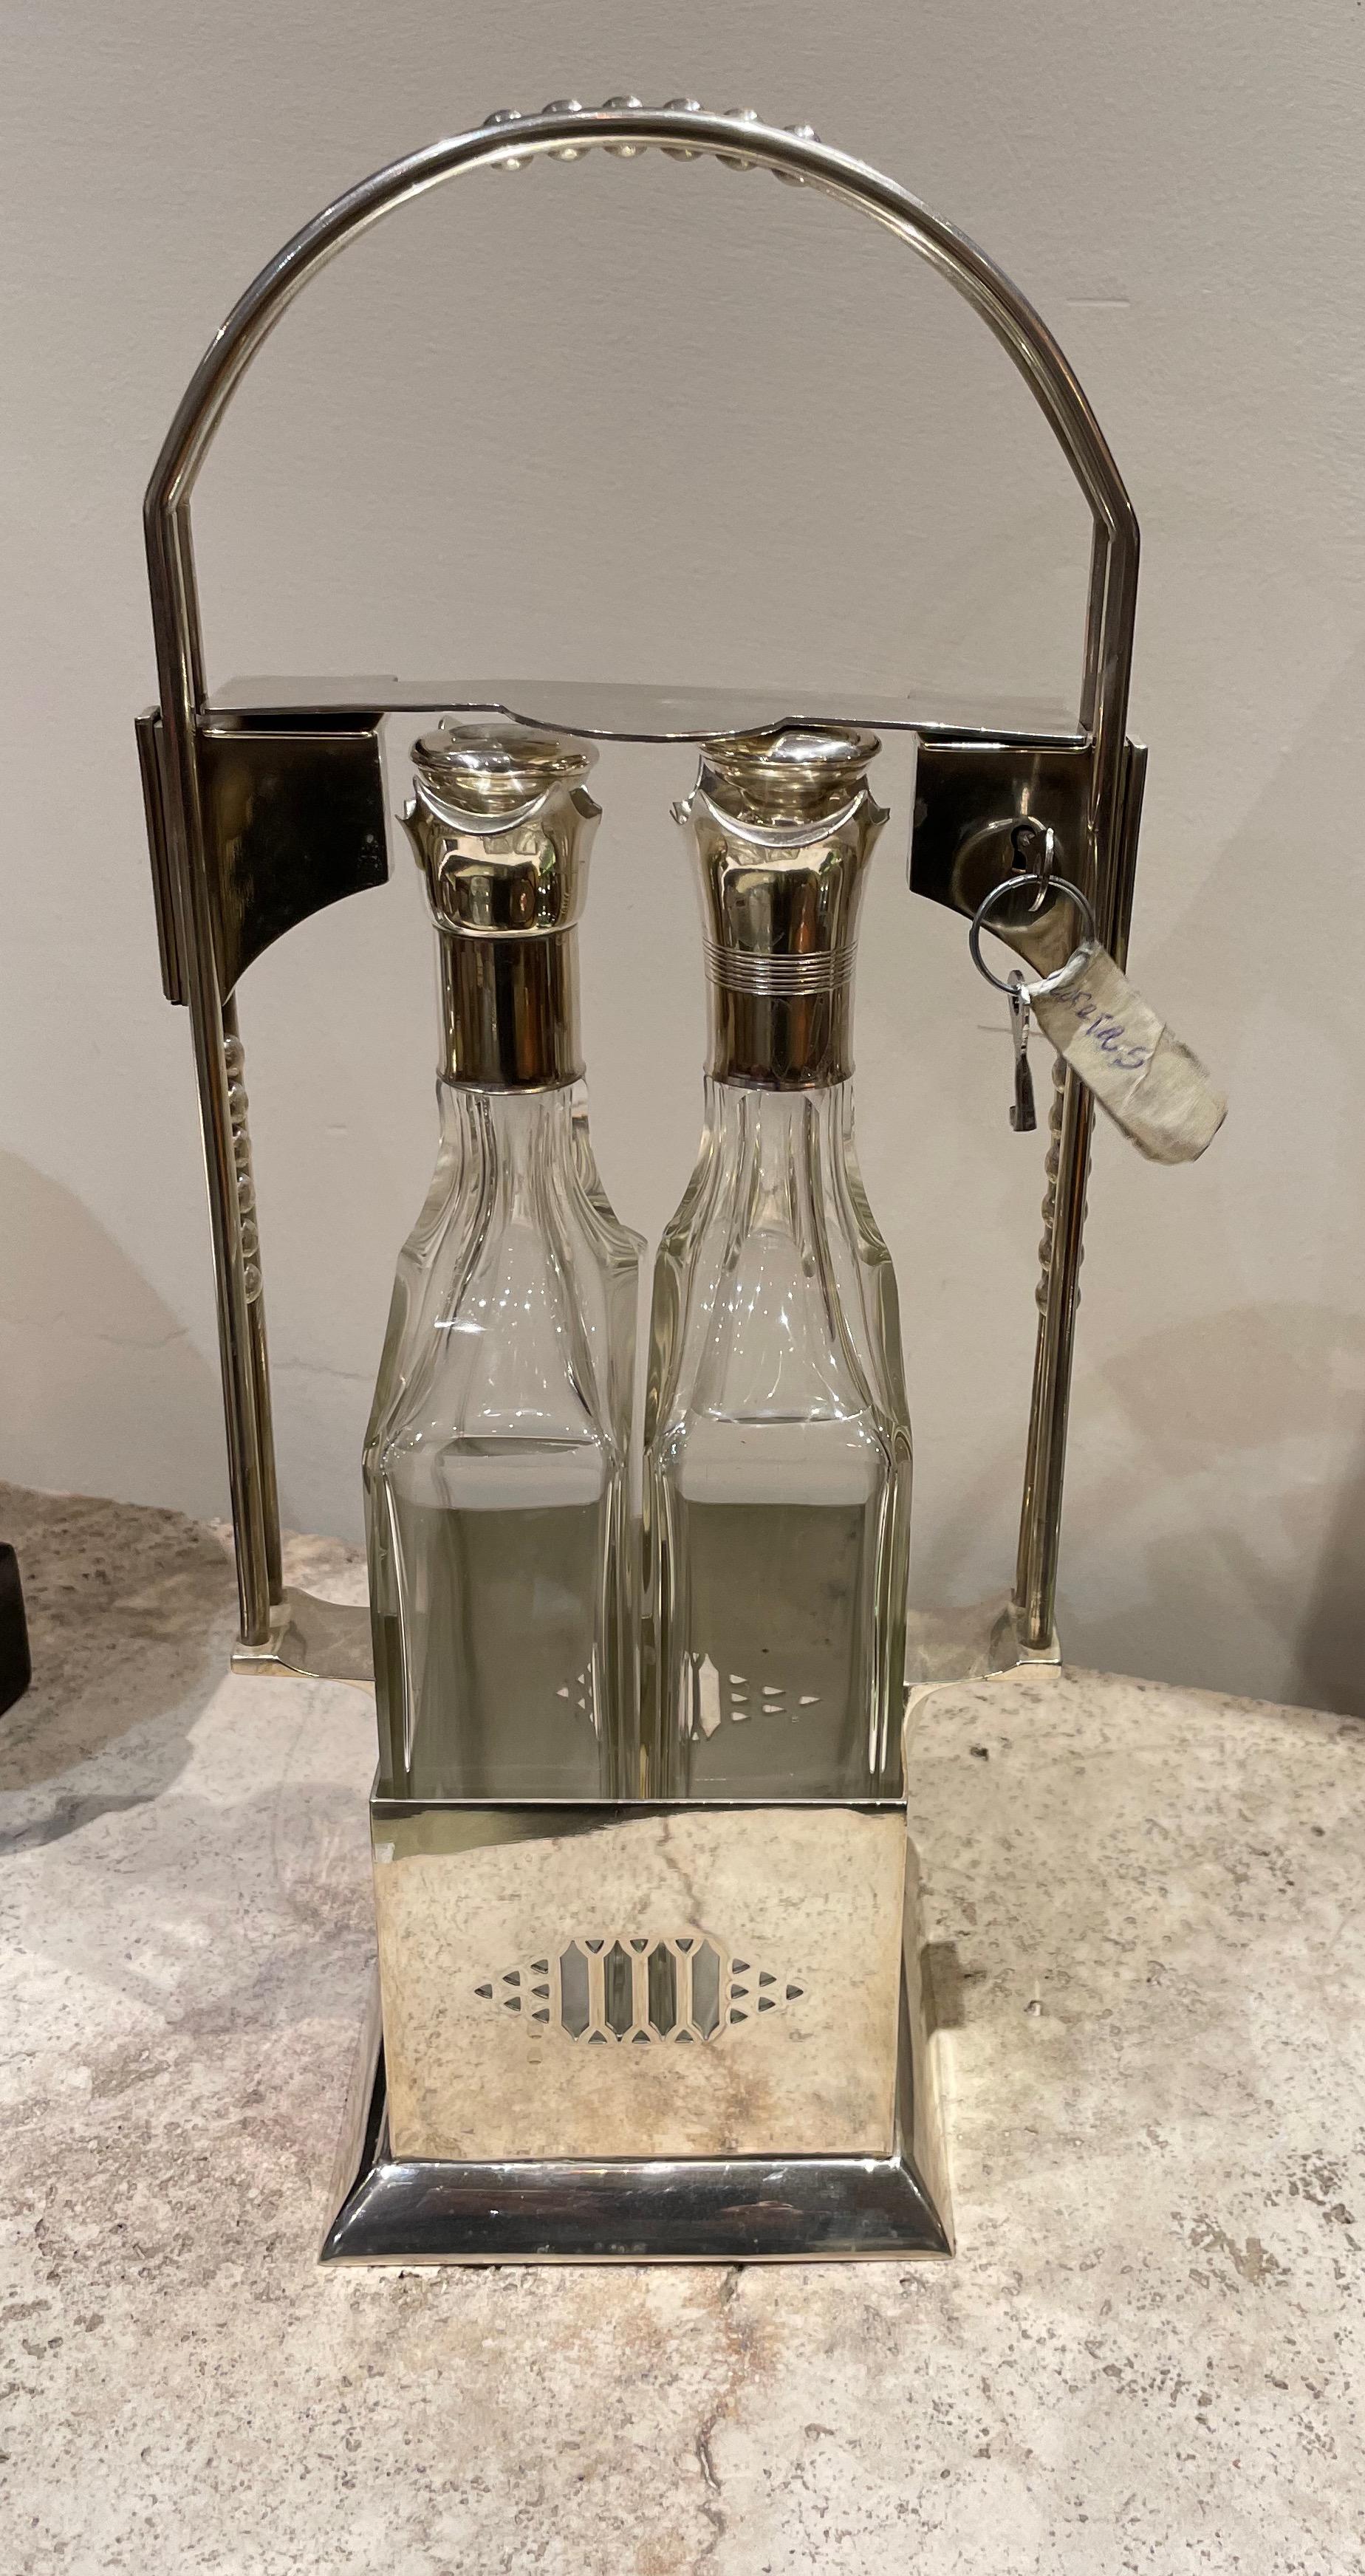 Jugendstil Tantalus Two Bottle silver-plate vintage liquor set. This elegant set was recently restored and in like-new condition. Original lock works and holds both bottles down to secure the tops so that everything works as intended. Normally we